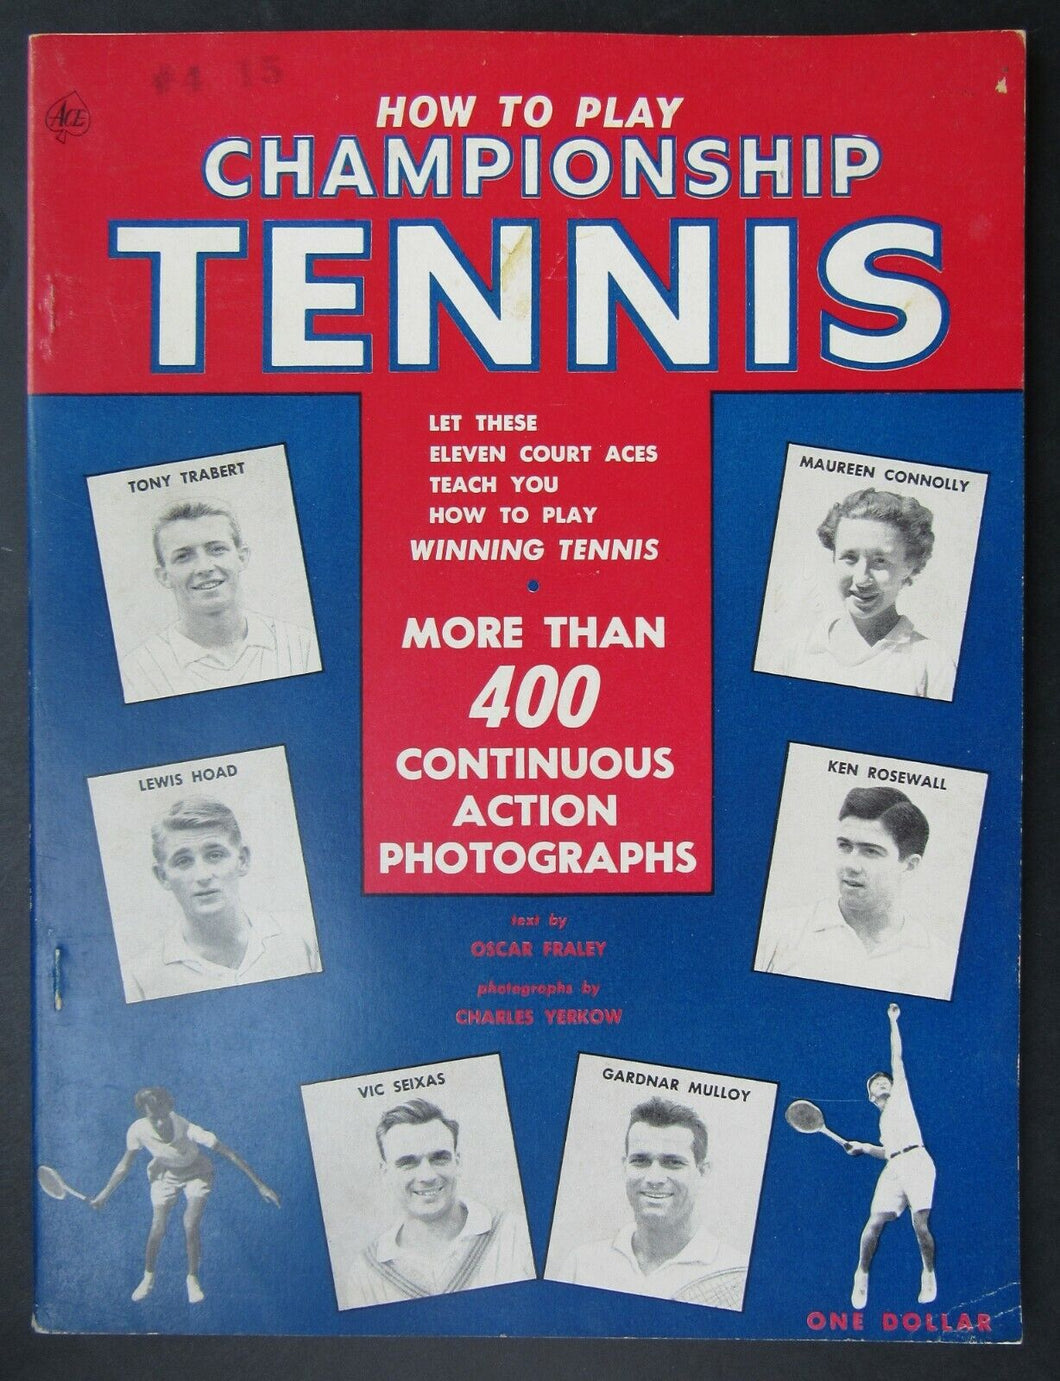 1954 How To Play Championship Tennis By Hoad Trabert Sexias Mulloy Rosewall